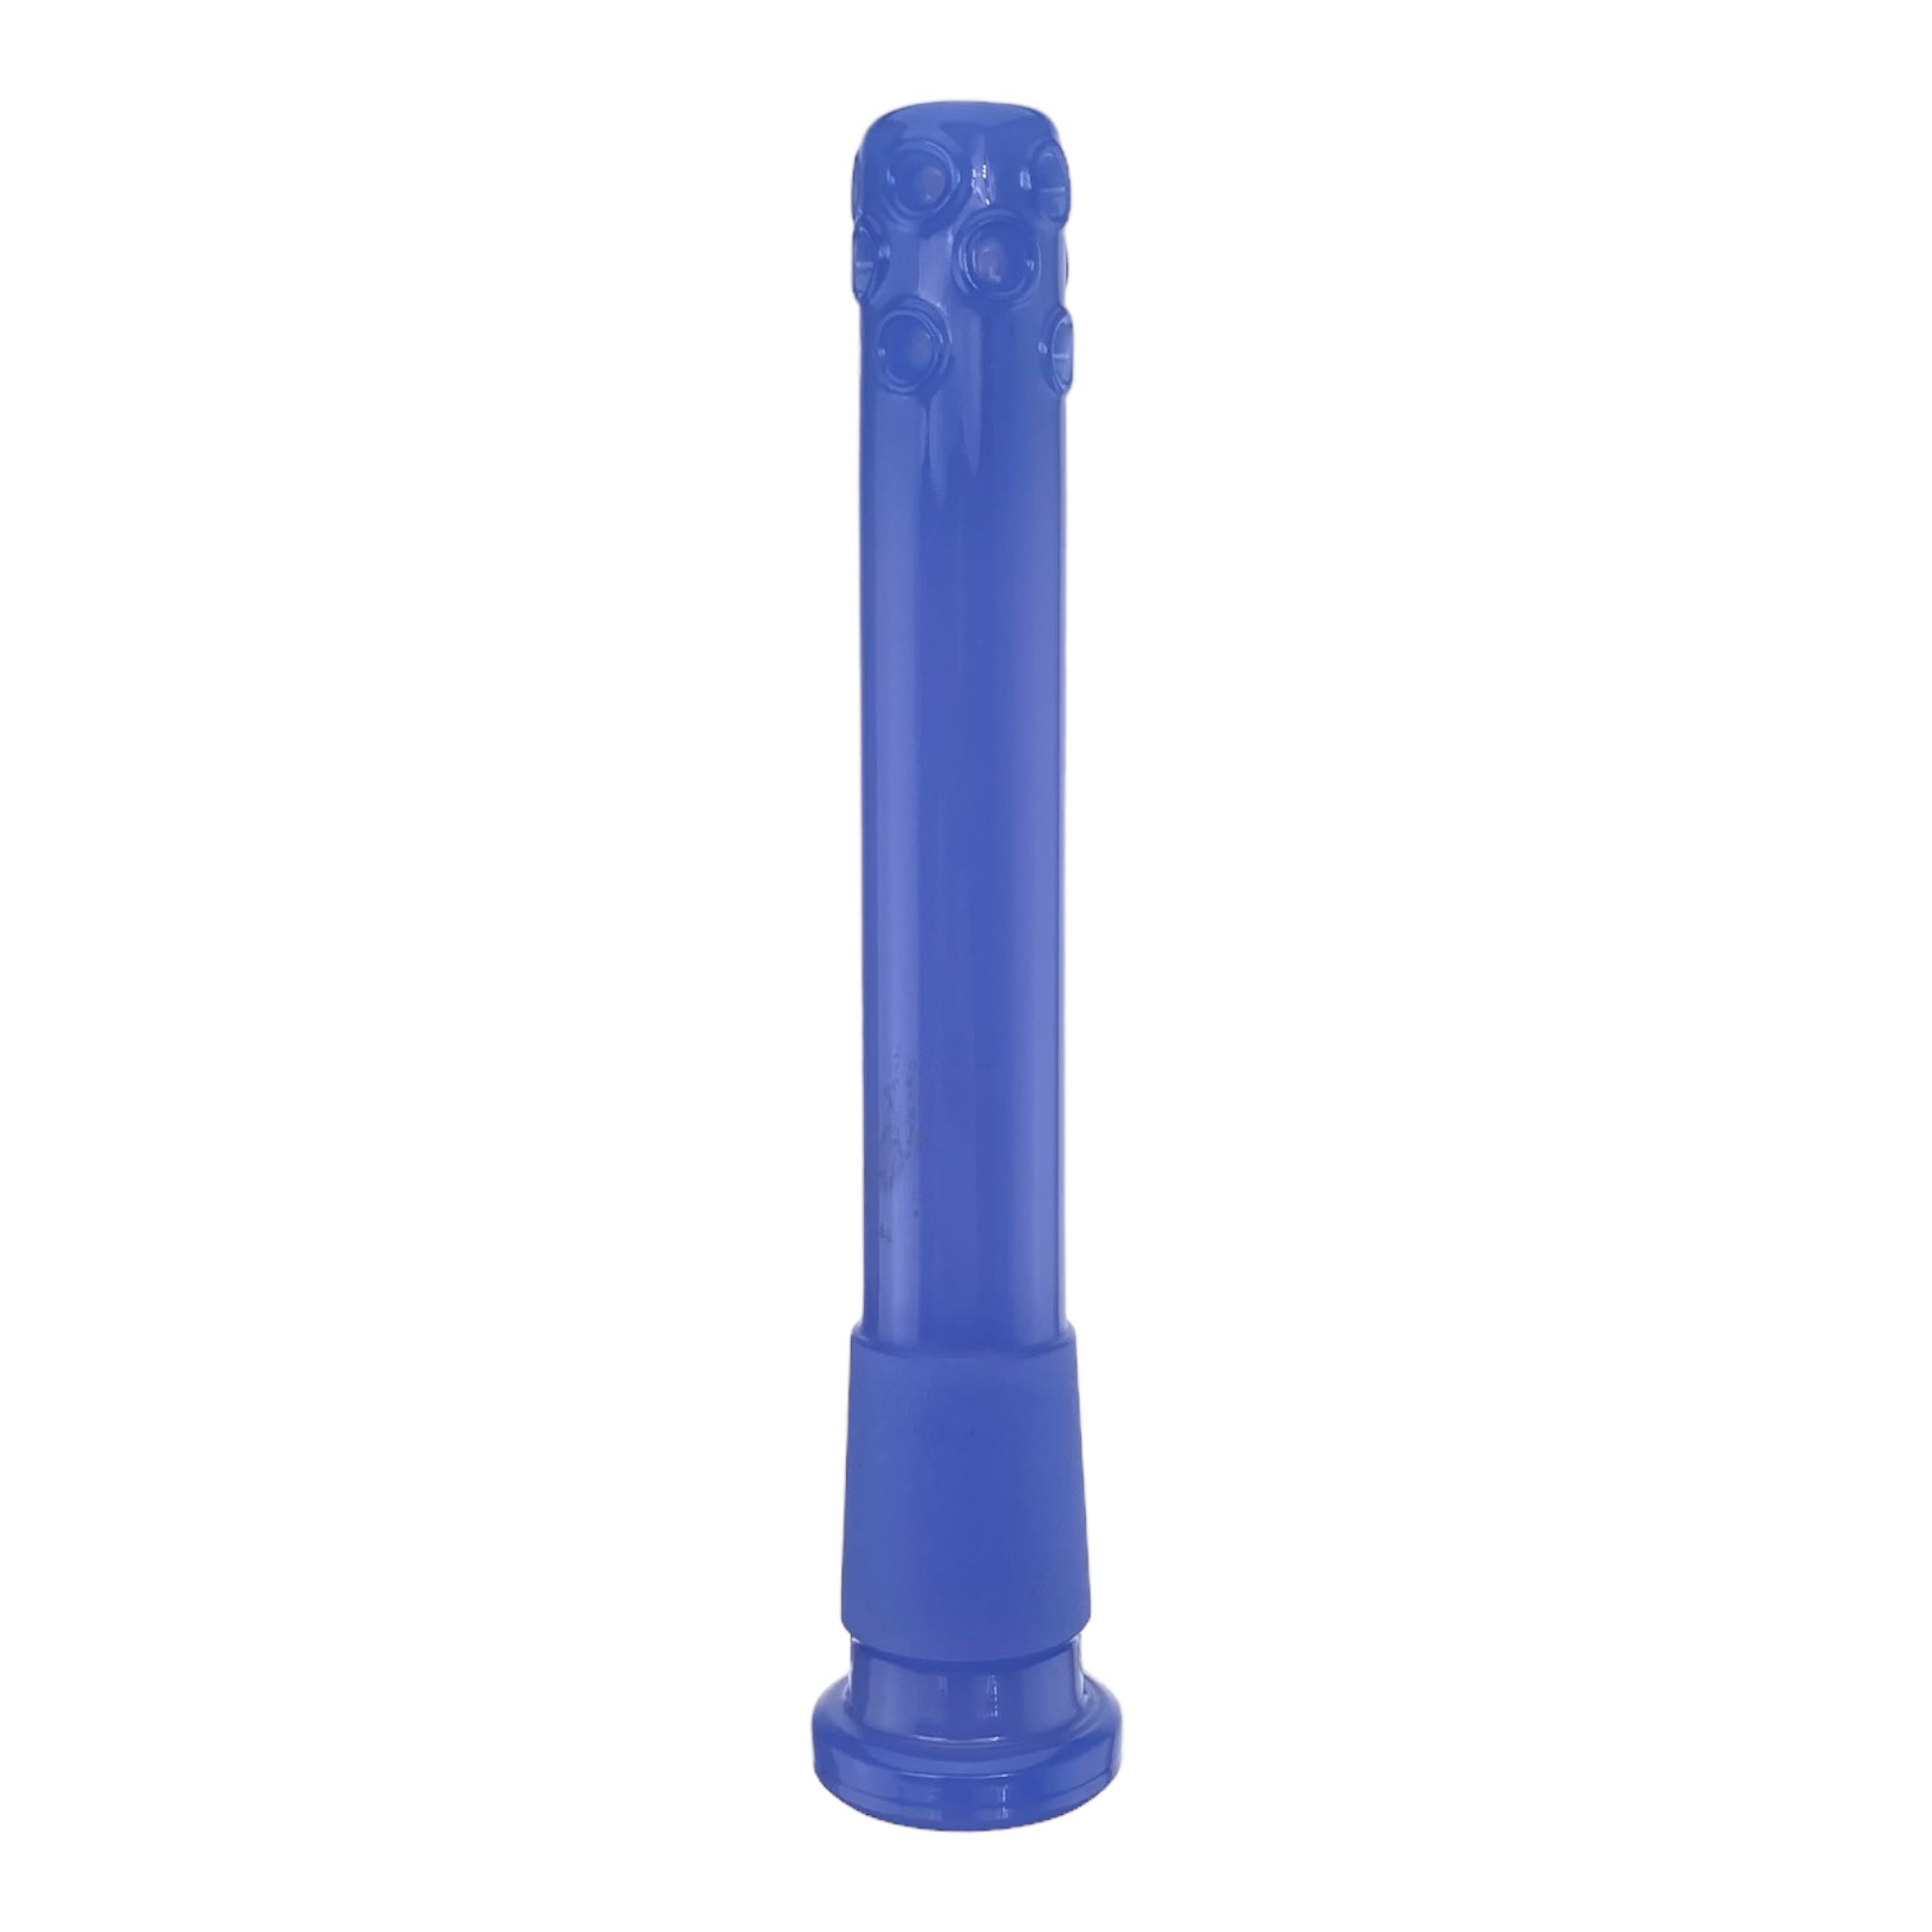 Periwinkle 6 Inch 18mm - 14mm Downstem For Glass Bong